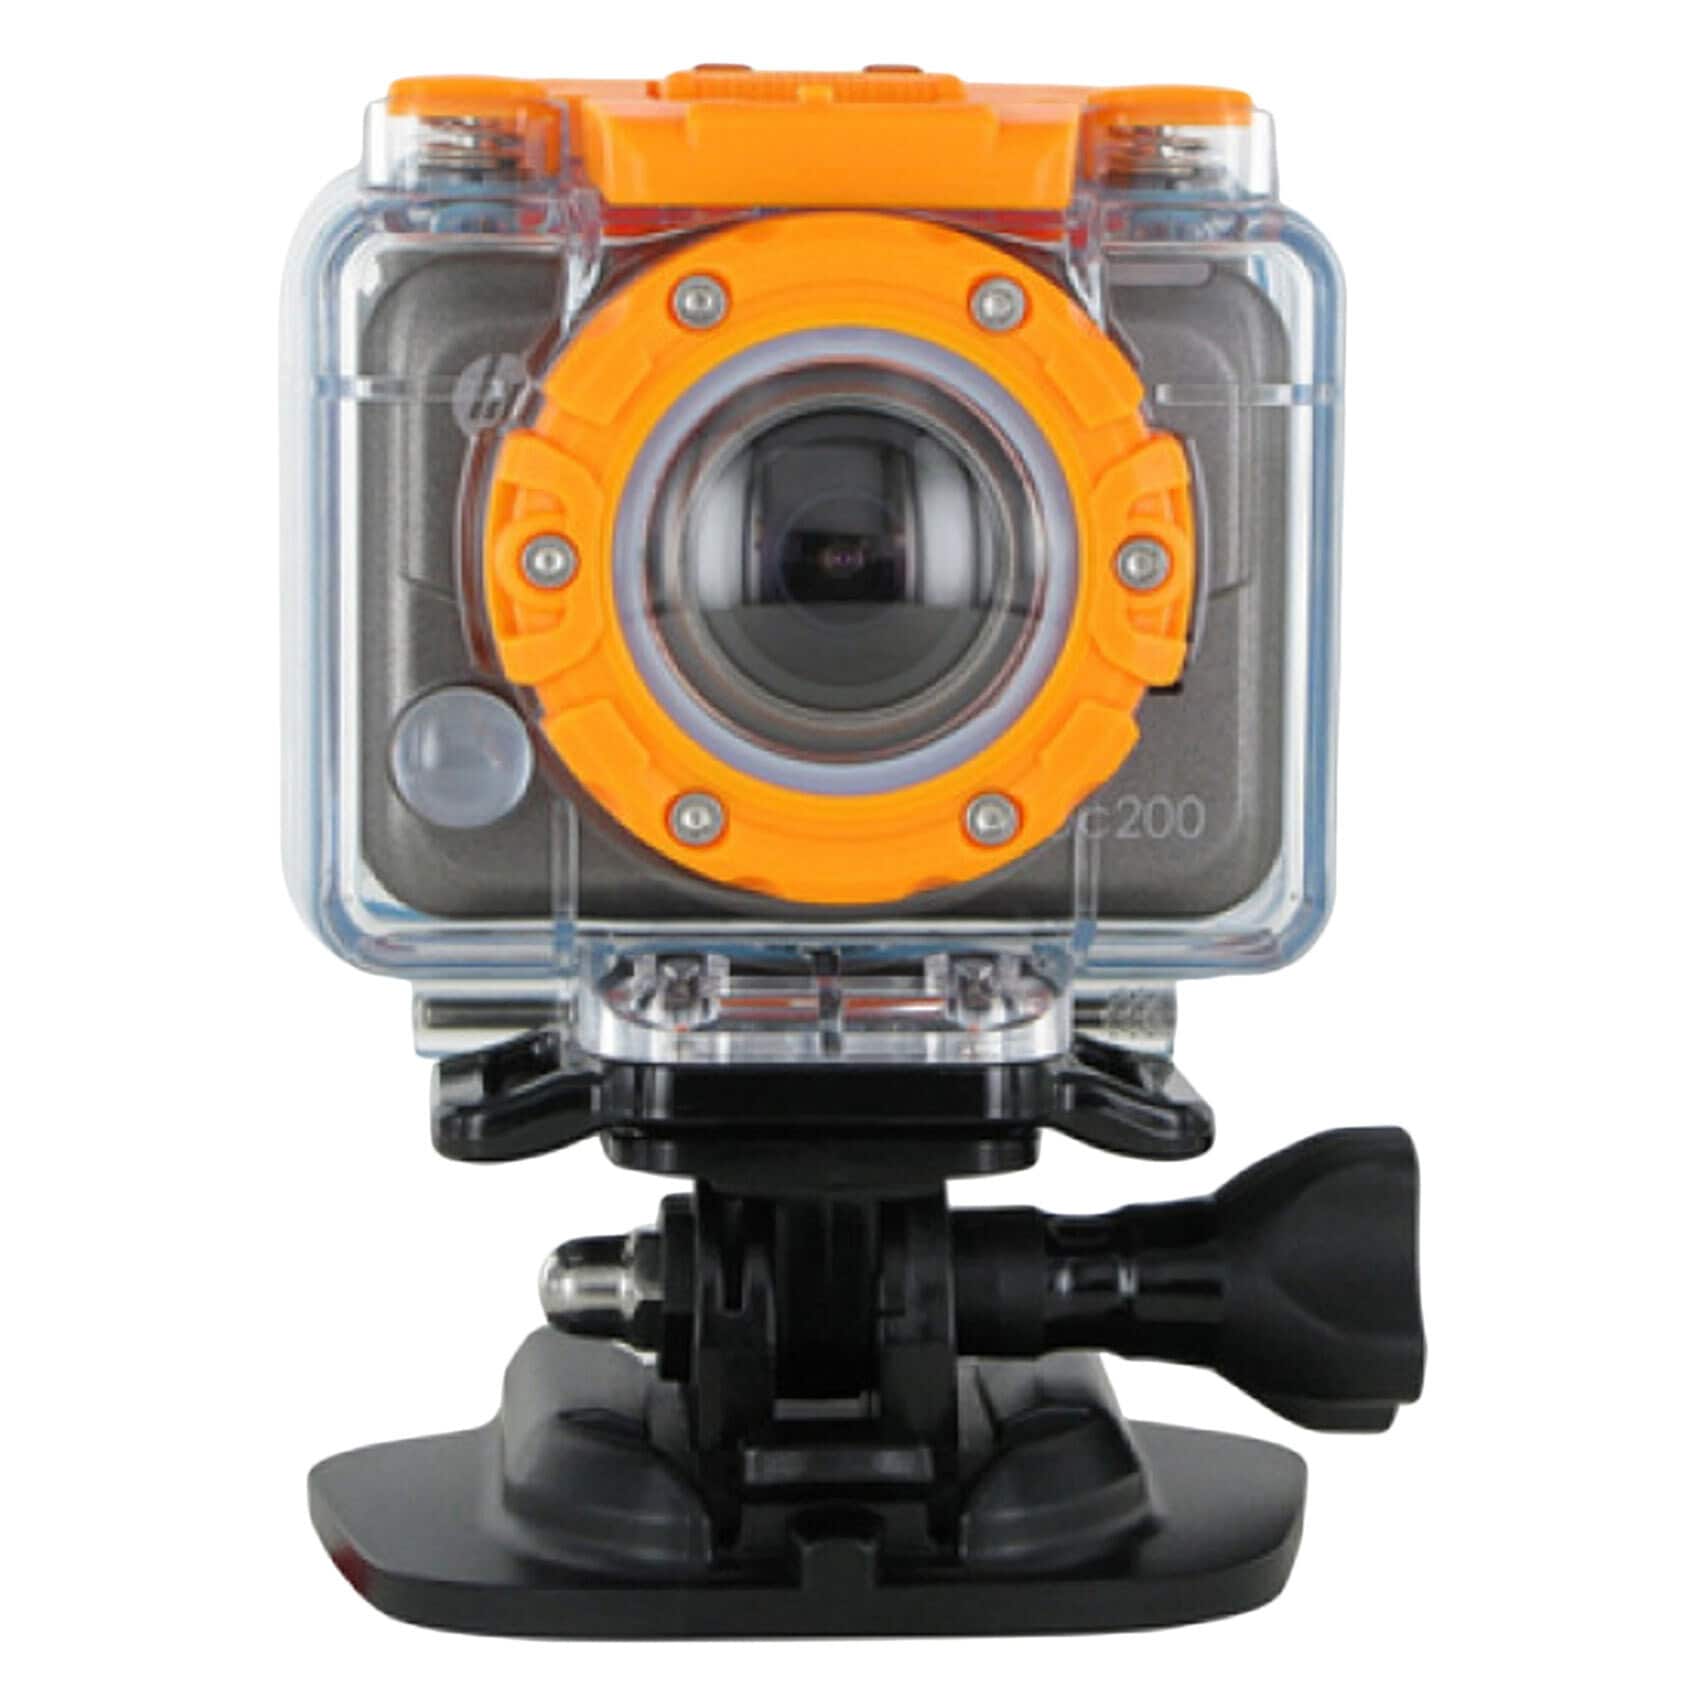 Buy HP Action Camera AC200W CA16 Online - Shop Electronics & Appliances on  Carrefour Lebanon